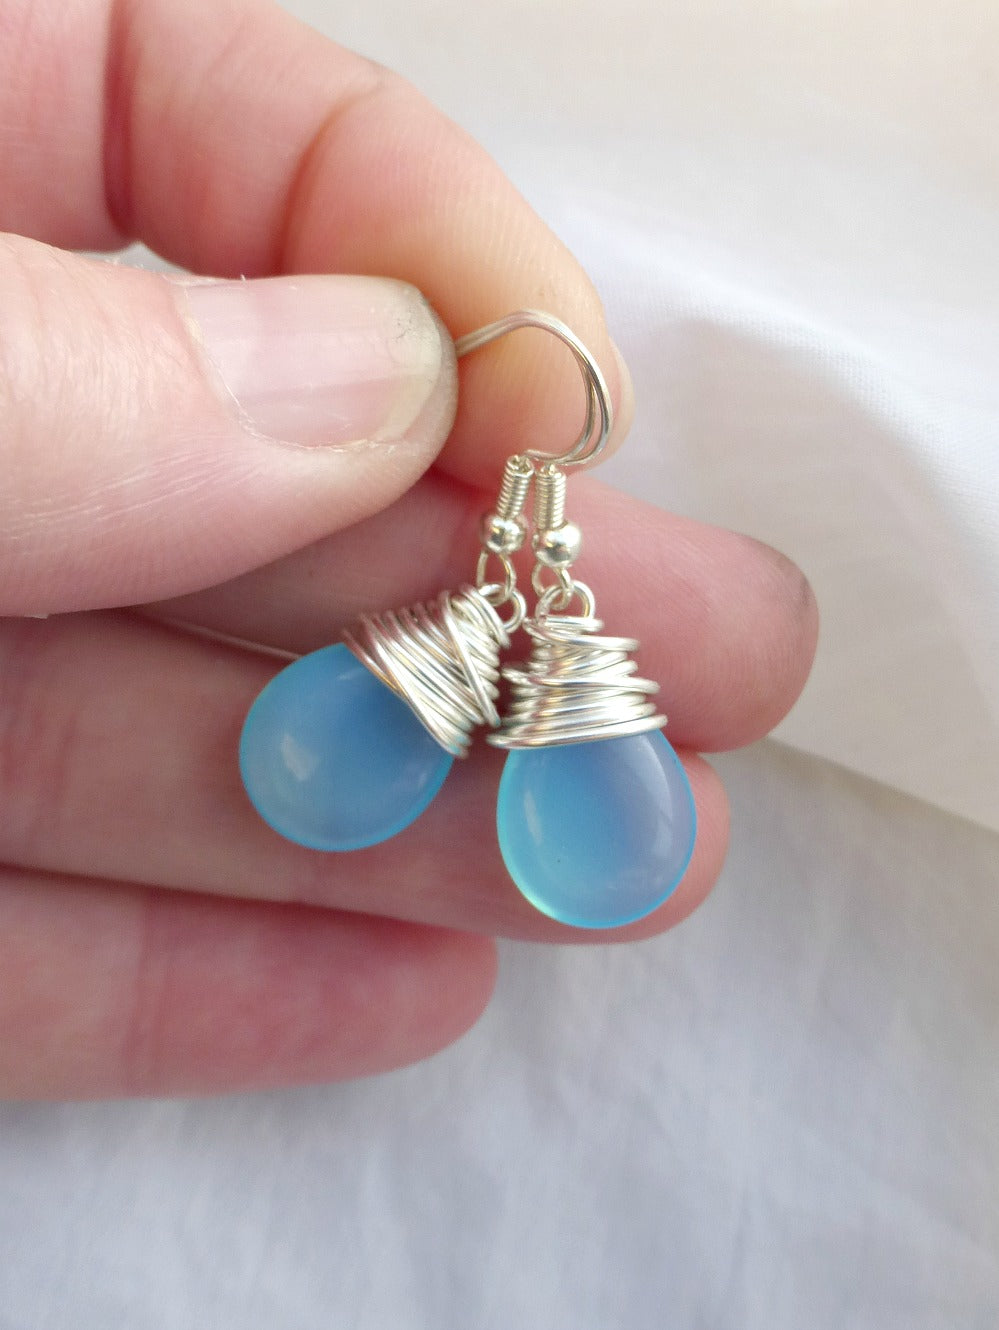 Sky blue transparent teardrop Czech Picasso glass, silver wire wrapping, sterling silver earrings. - Andria Bieber Designs 